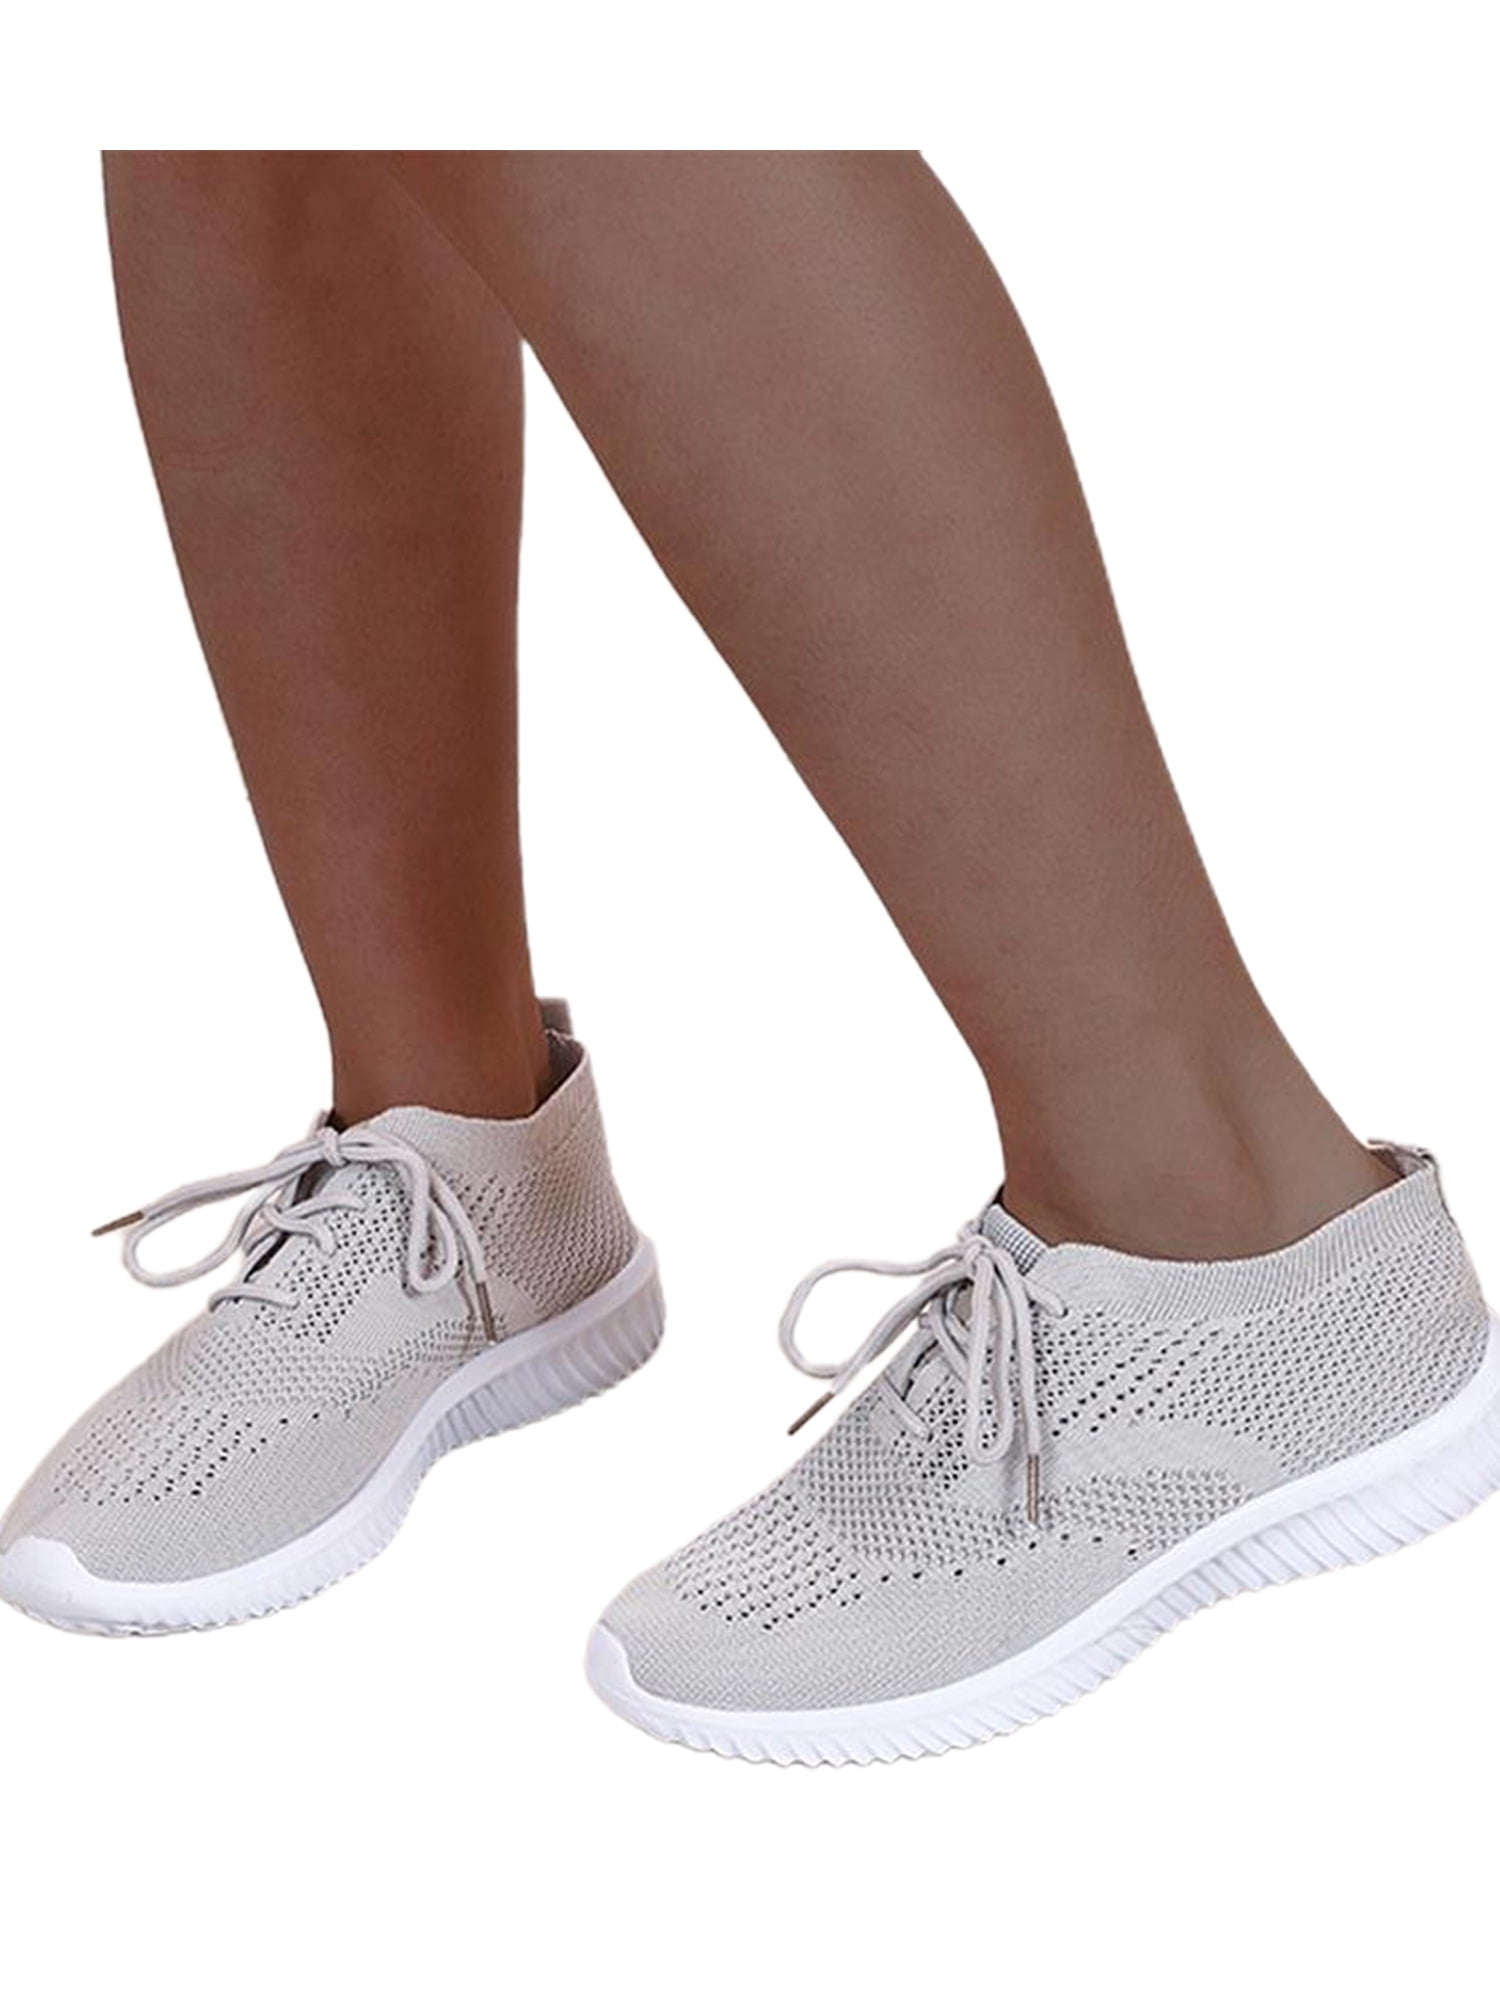 Womens Lace Up Sneakers Comfy Casual Trainers Walking Running Jogging Shoes Size 